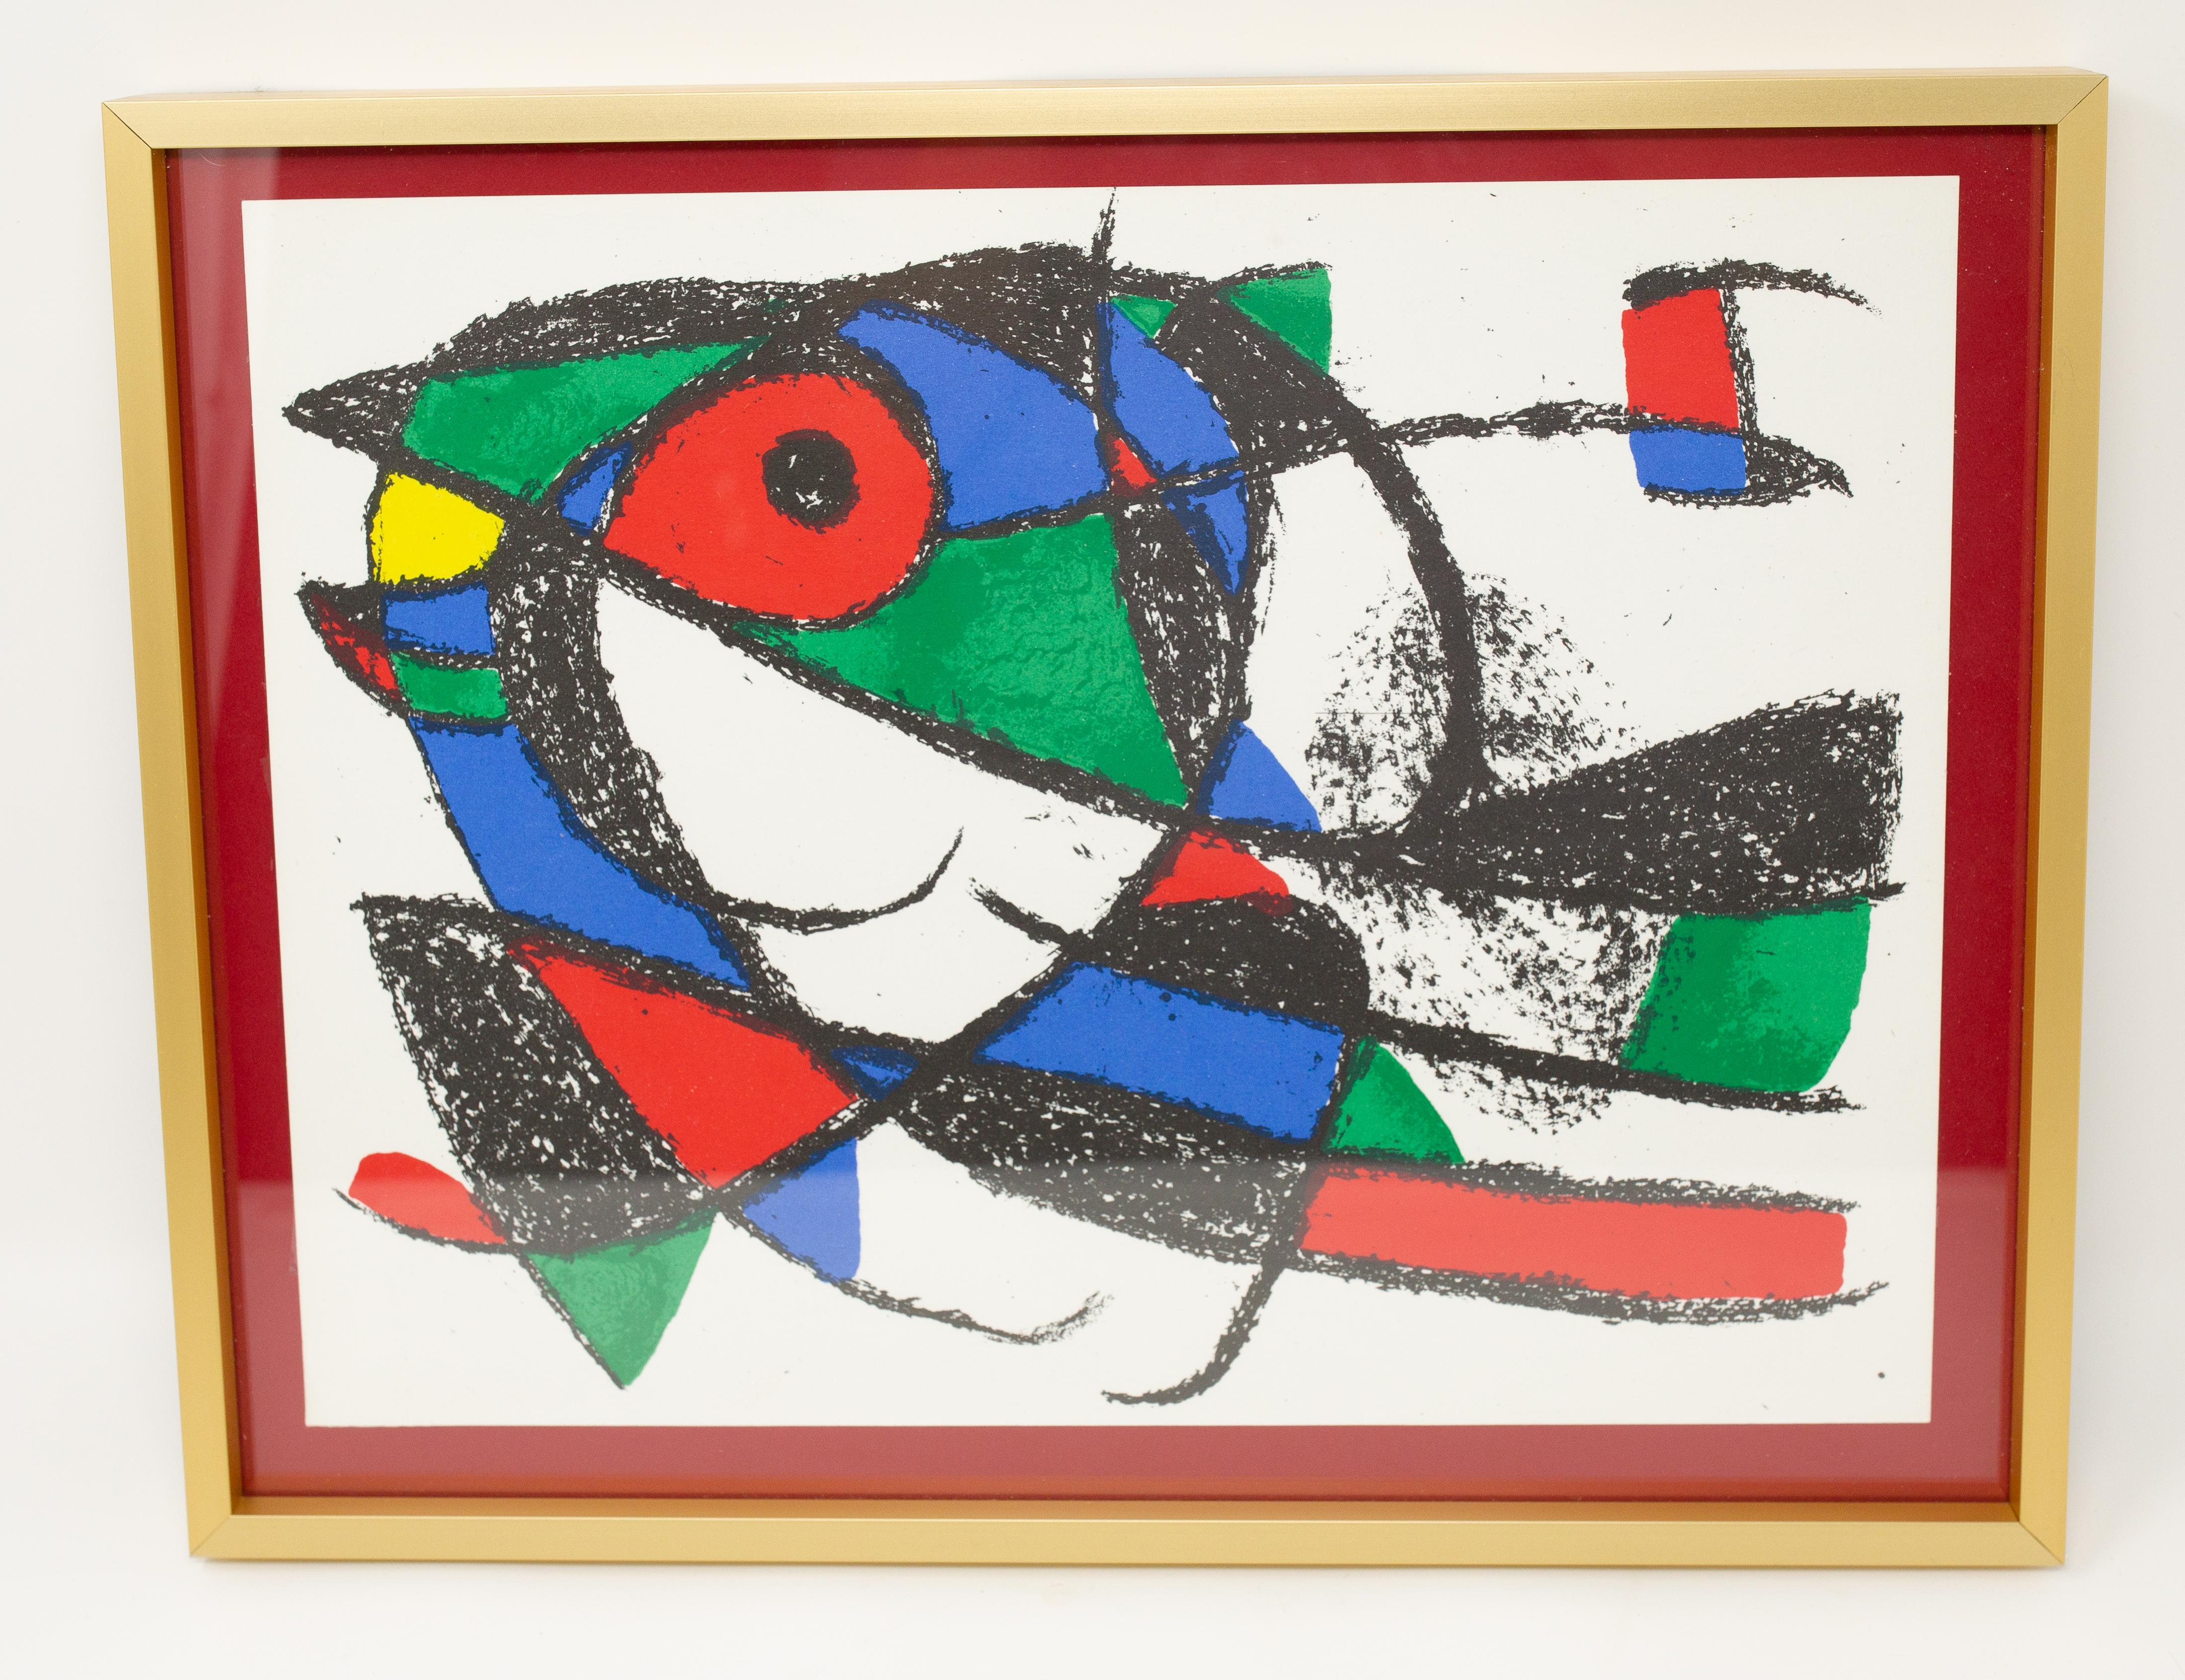 Offering this gorgeous Joan Miro' Color Lithograph. With vibrant green, red, blue, and yellow with artistic black lines and curves. 

Joan Miró (Spanish, 1893 – 1983)
Untitled (abstract), 1975
Color lithograph on paper
Unsigned
Pulled from